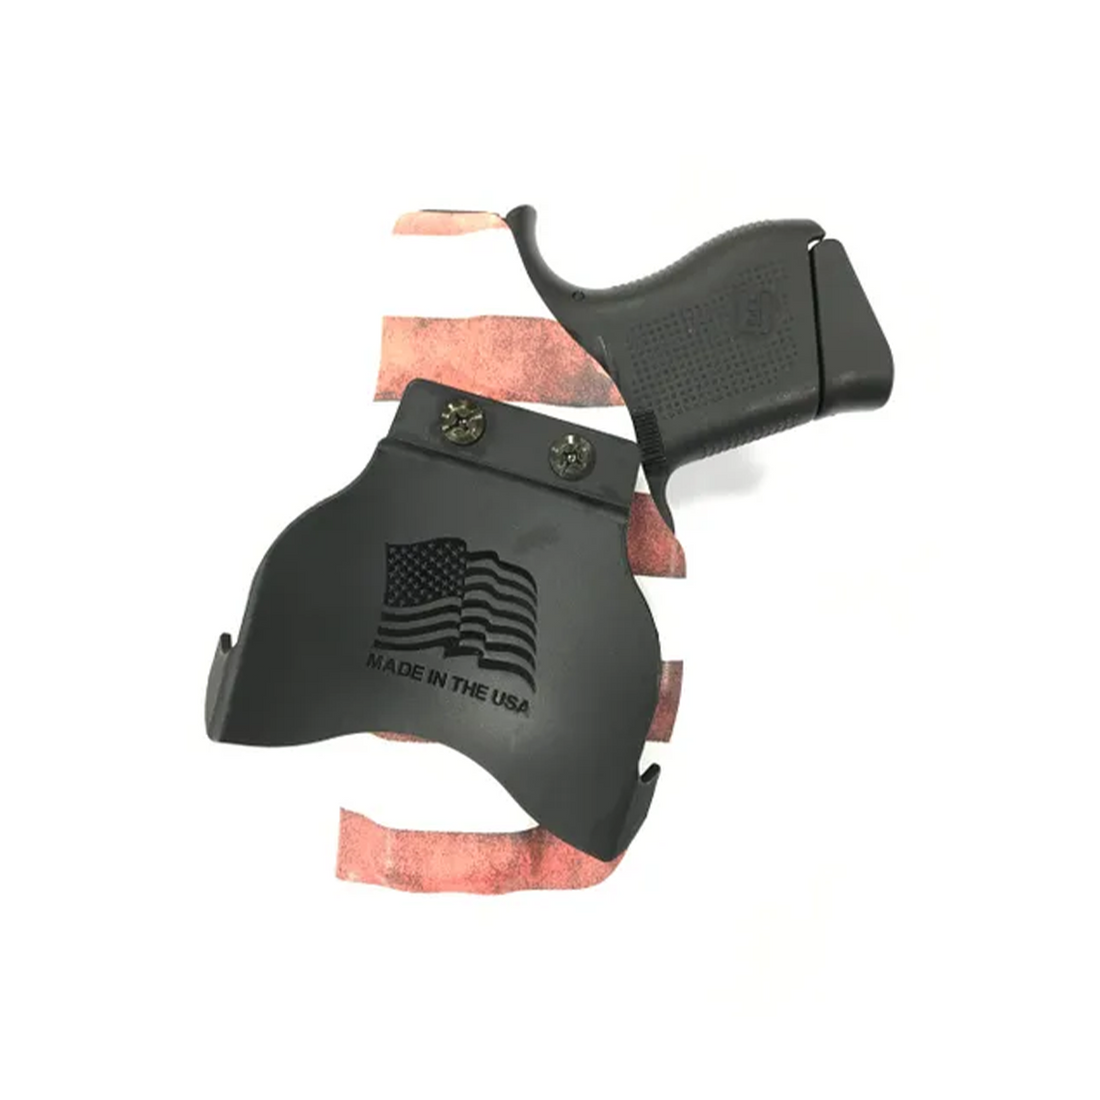 Smith & Wesson IWB/OWB 2-n-1 Paddle Holsters